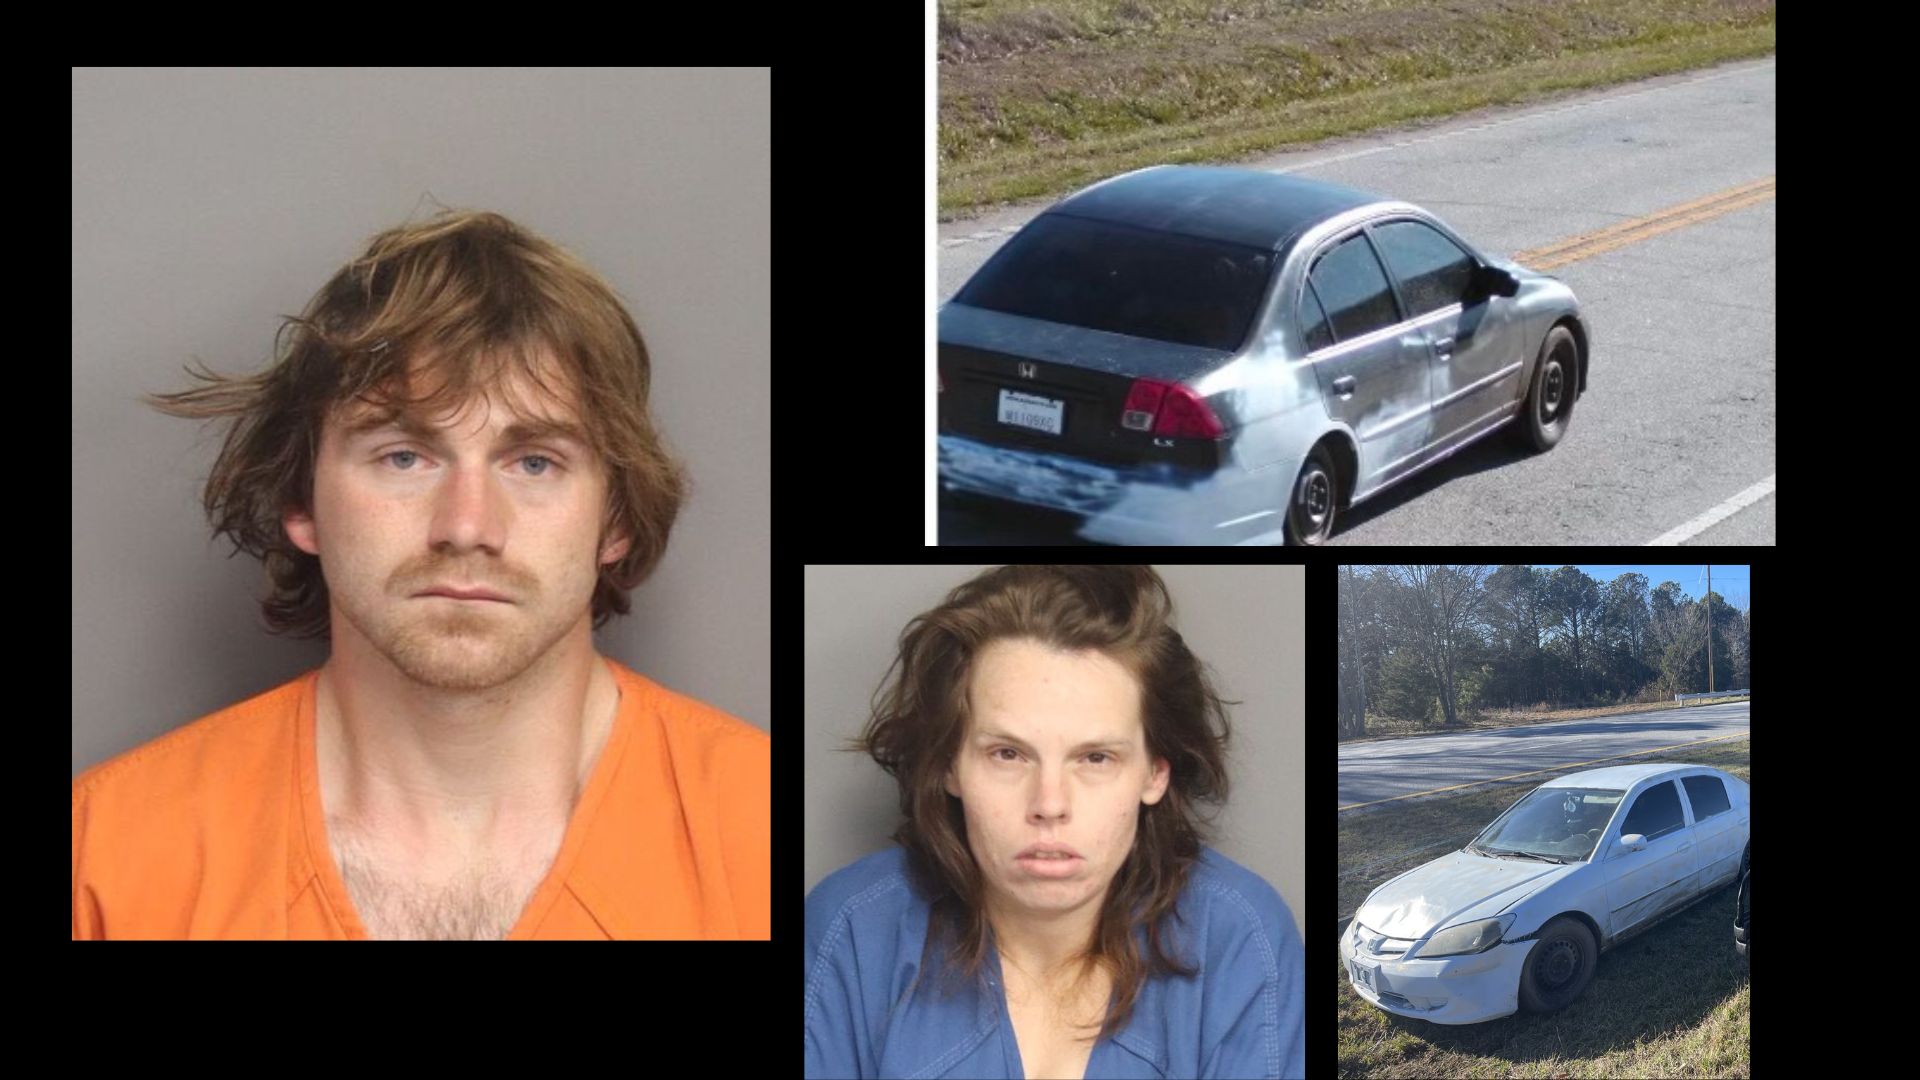 South Carolina Duo Lead Police On Stolen Car Chase With Cat, Dog, and Four Chickens Inside